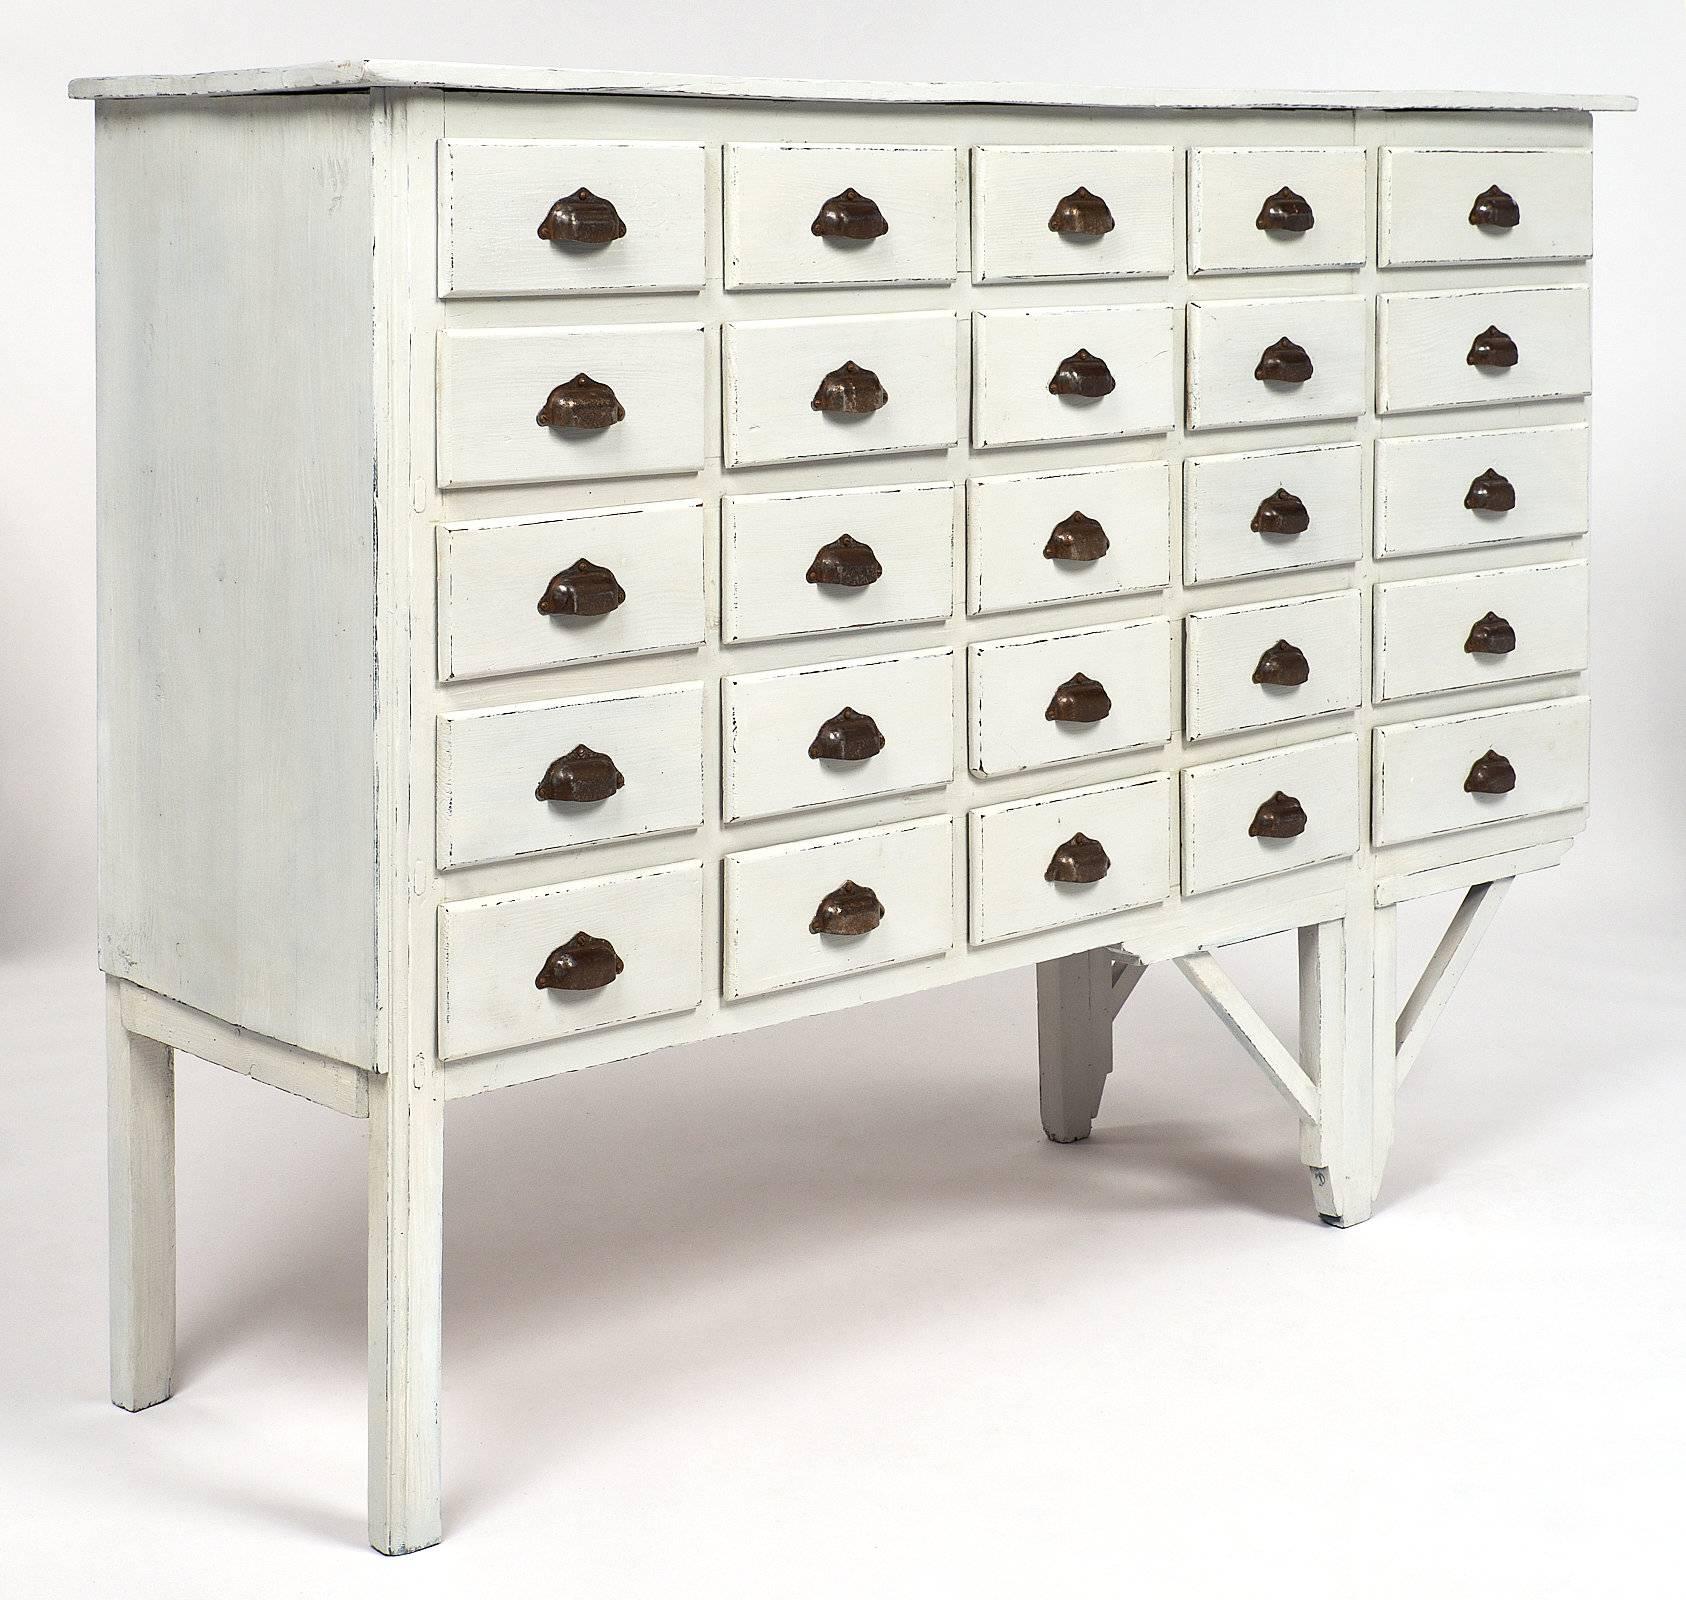 Unique and authentic antique Haberdashery cabinet from a late 19th century “Mercerie” in Lyon, France. This piece has an asymmetrical construction, probably due to the constraint of the work place, which gives it character and an interesting